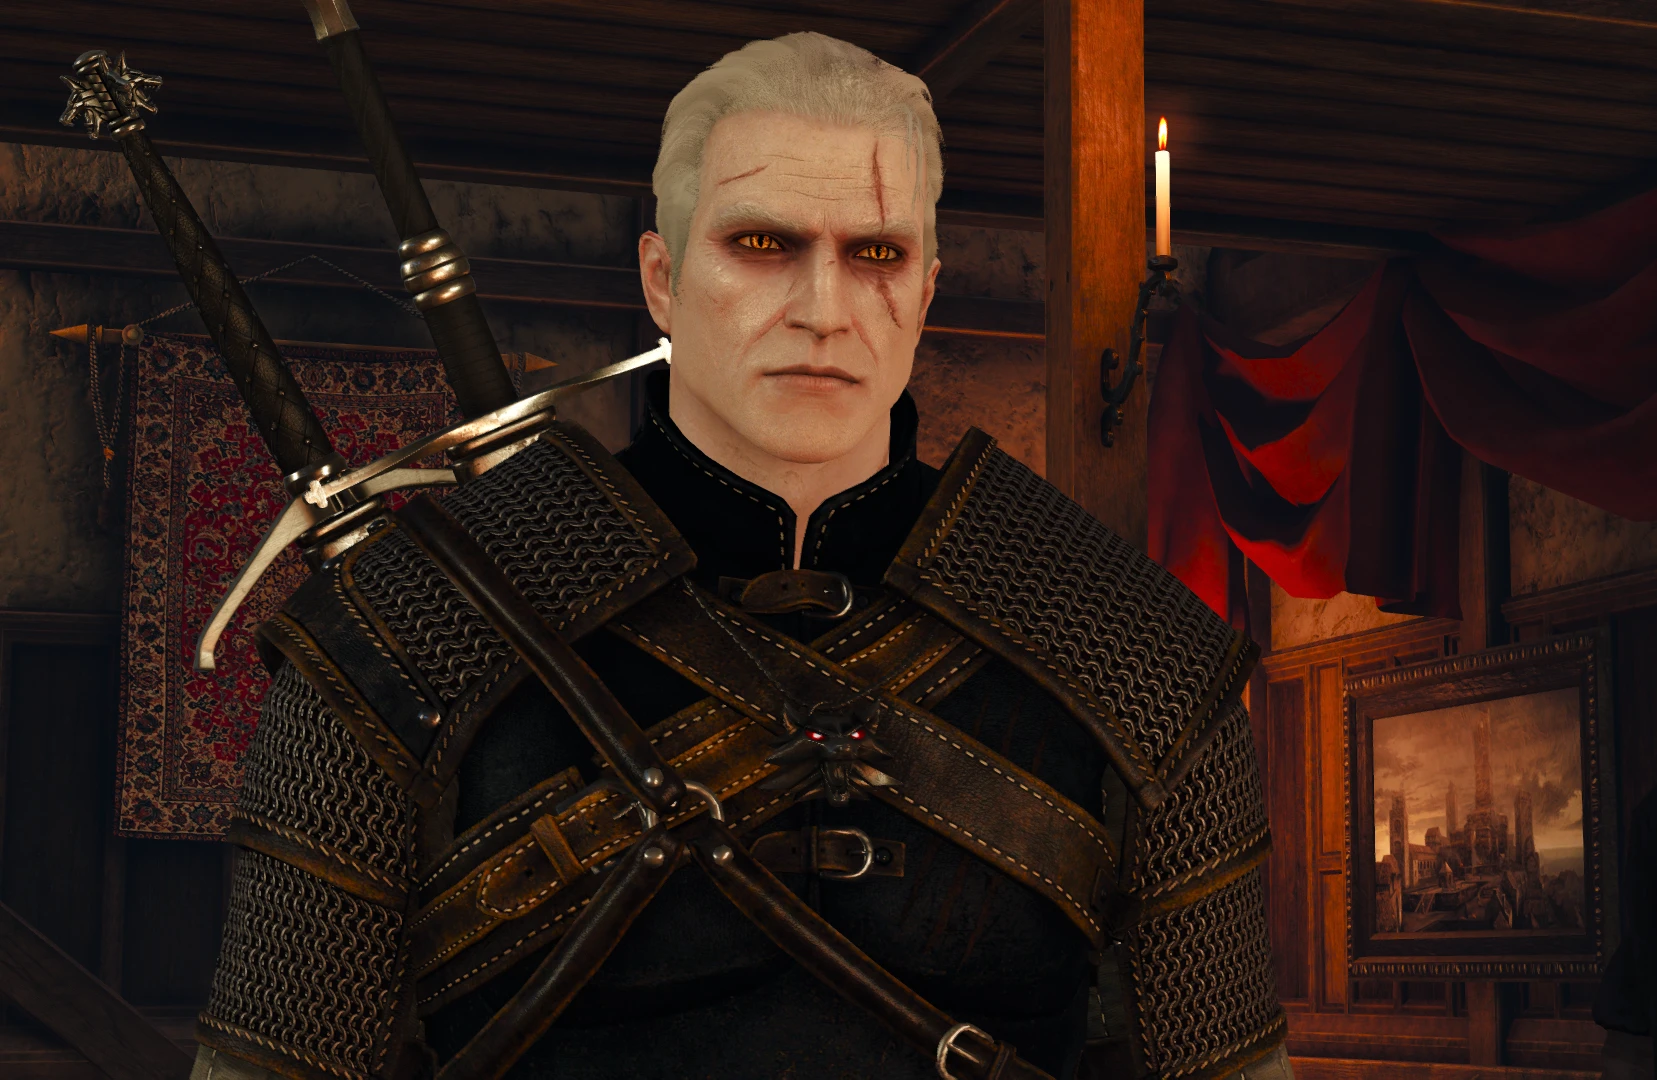 The Witcher III shaved Geralt for The Witcher 2